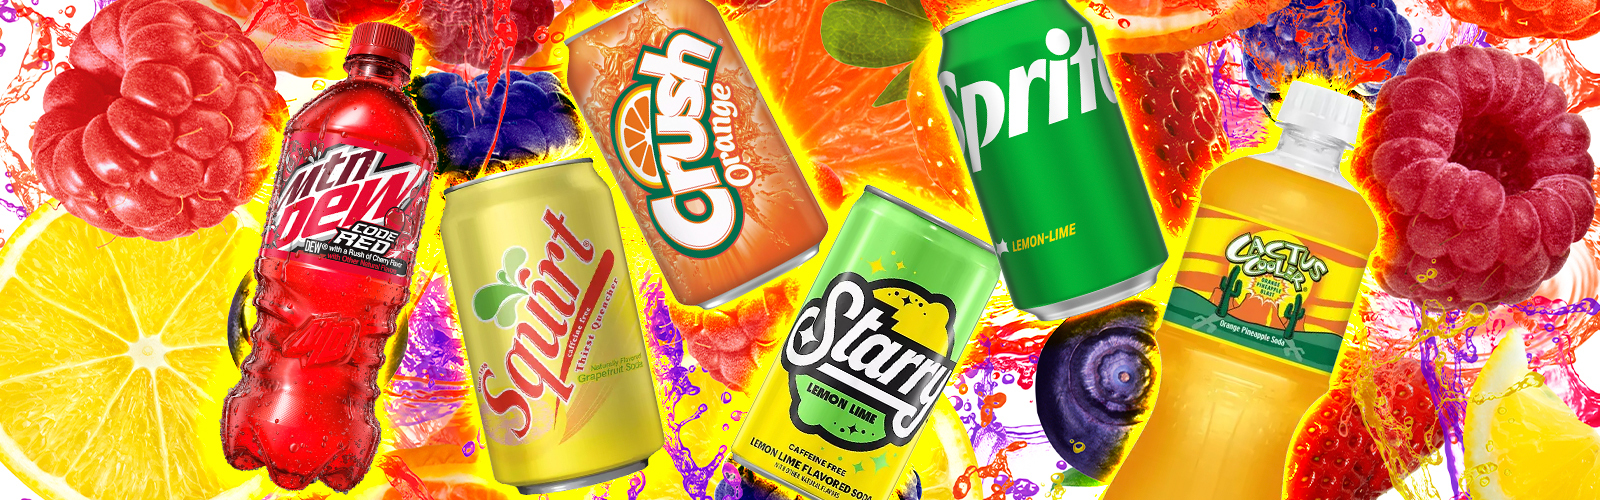 The Best Store-Bought Cola-Flavored Sodas